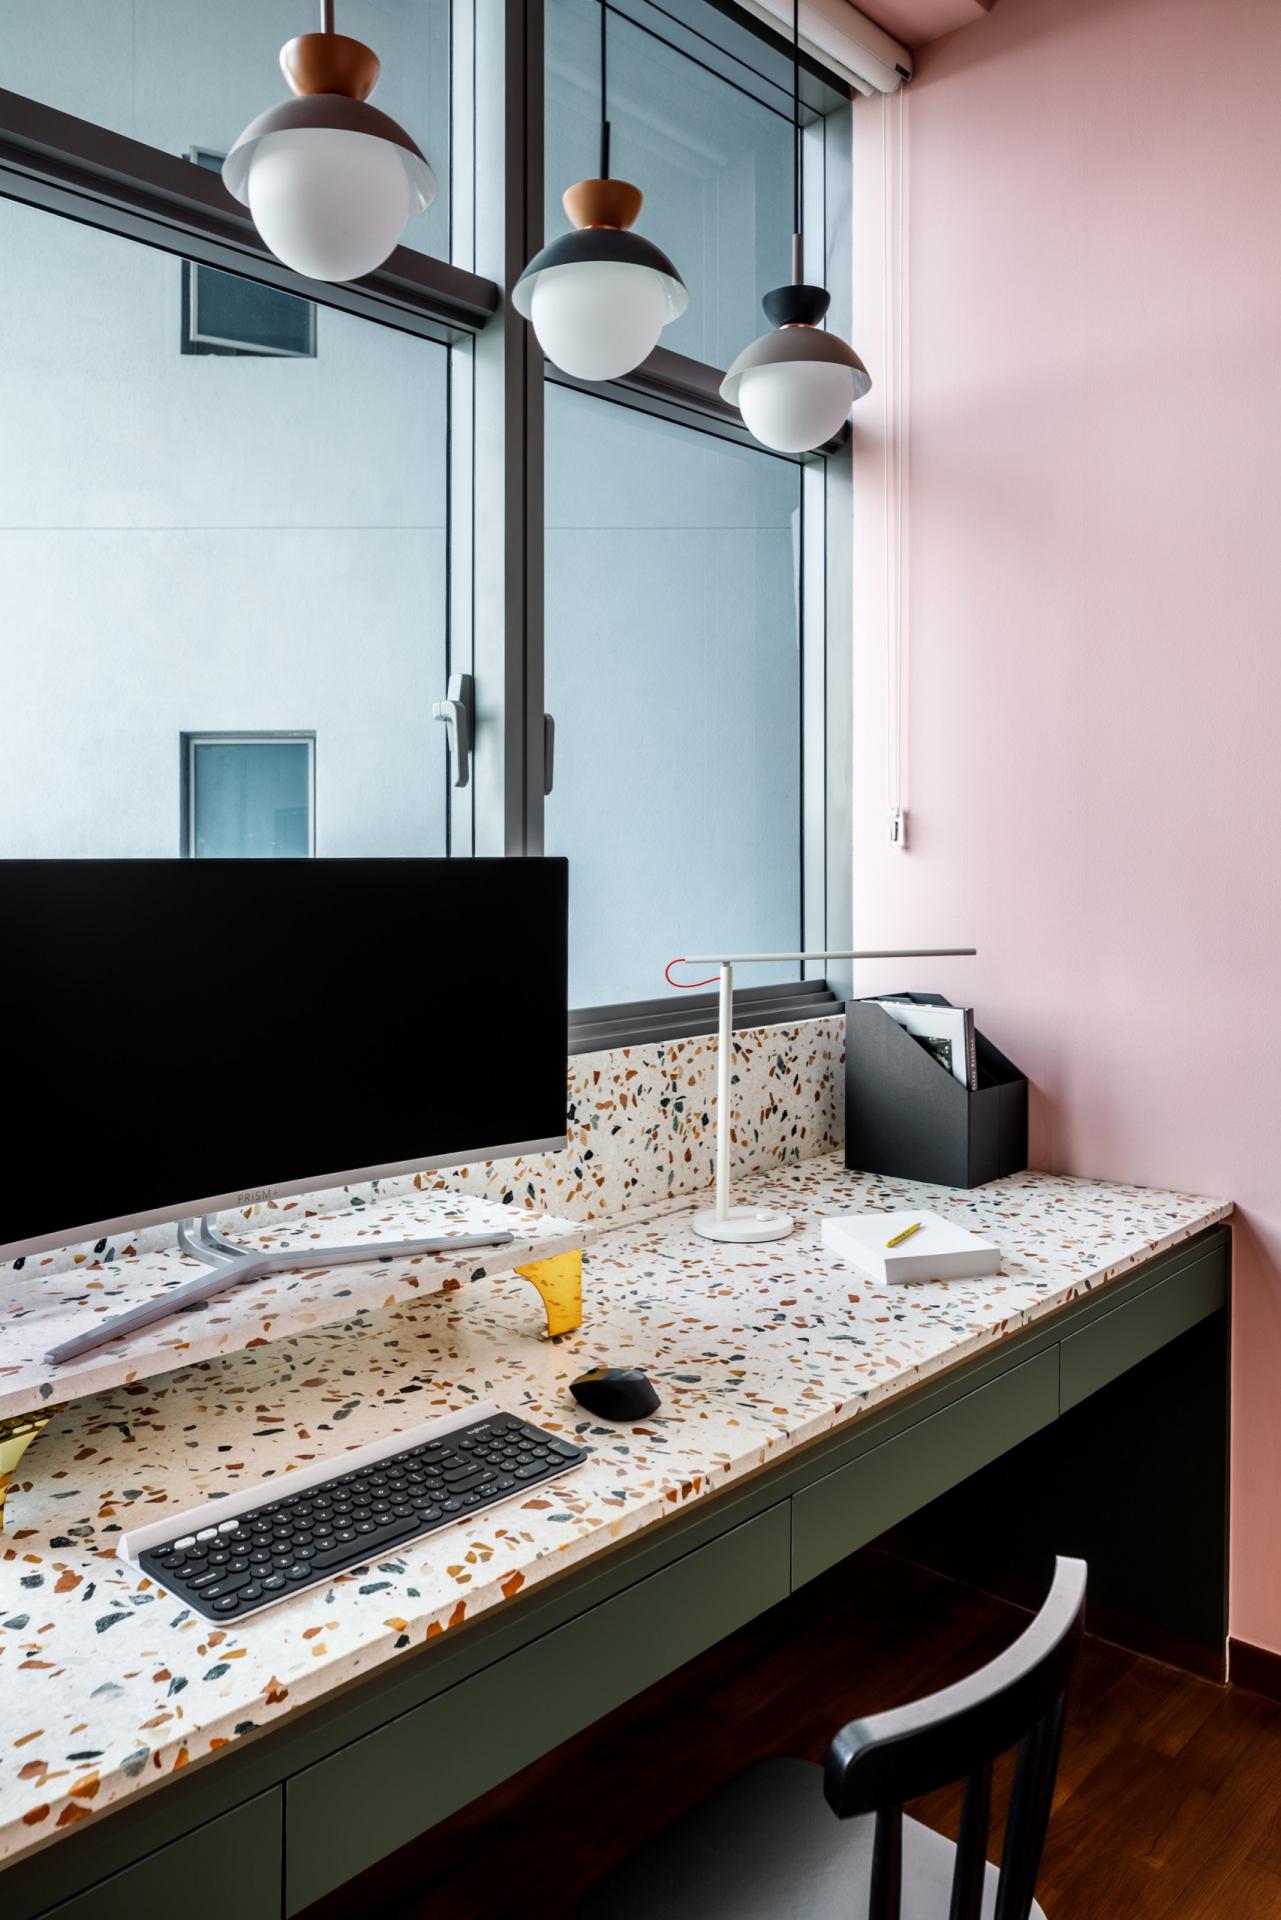 This Unconventional Condo in Singapore is Colourful, Cushy And Cosy